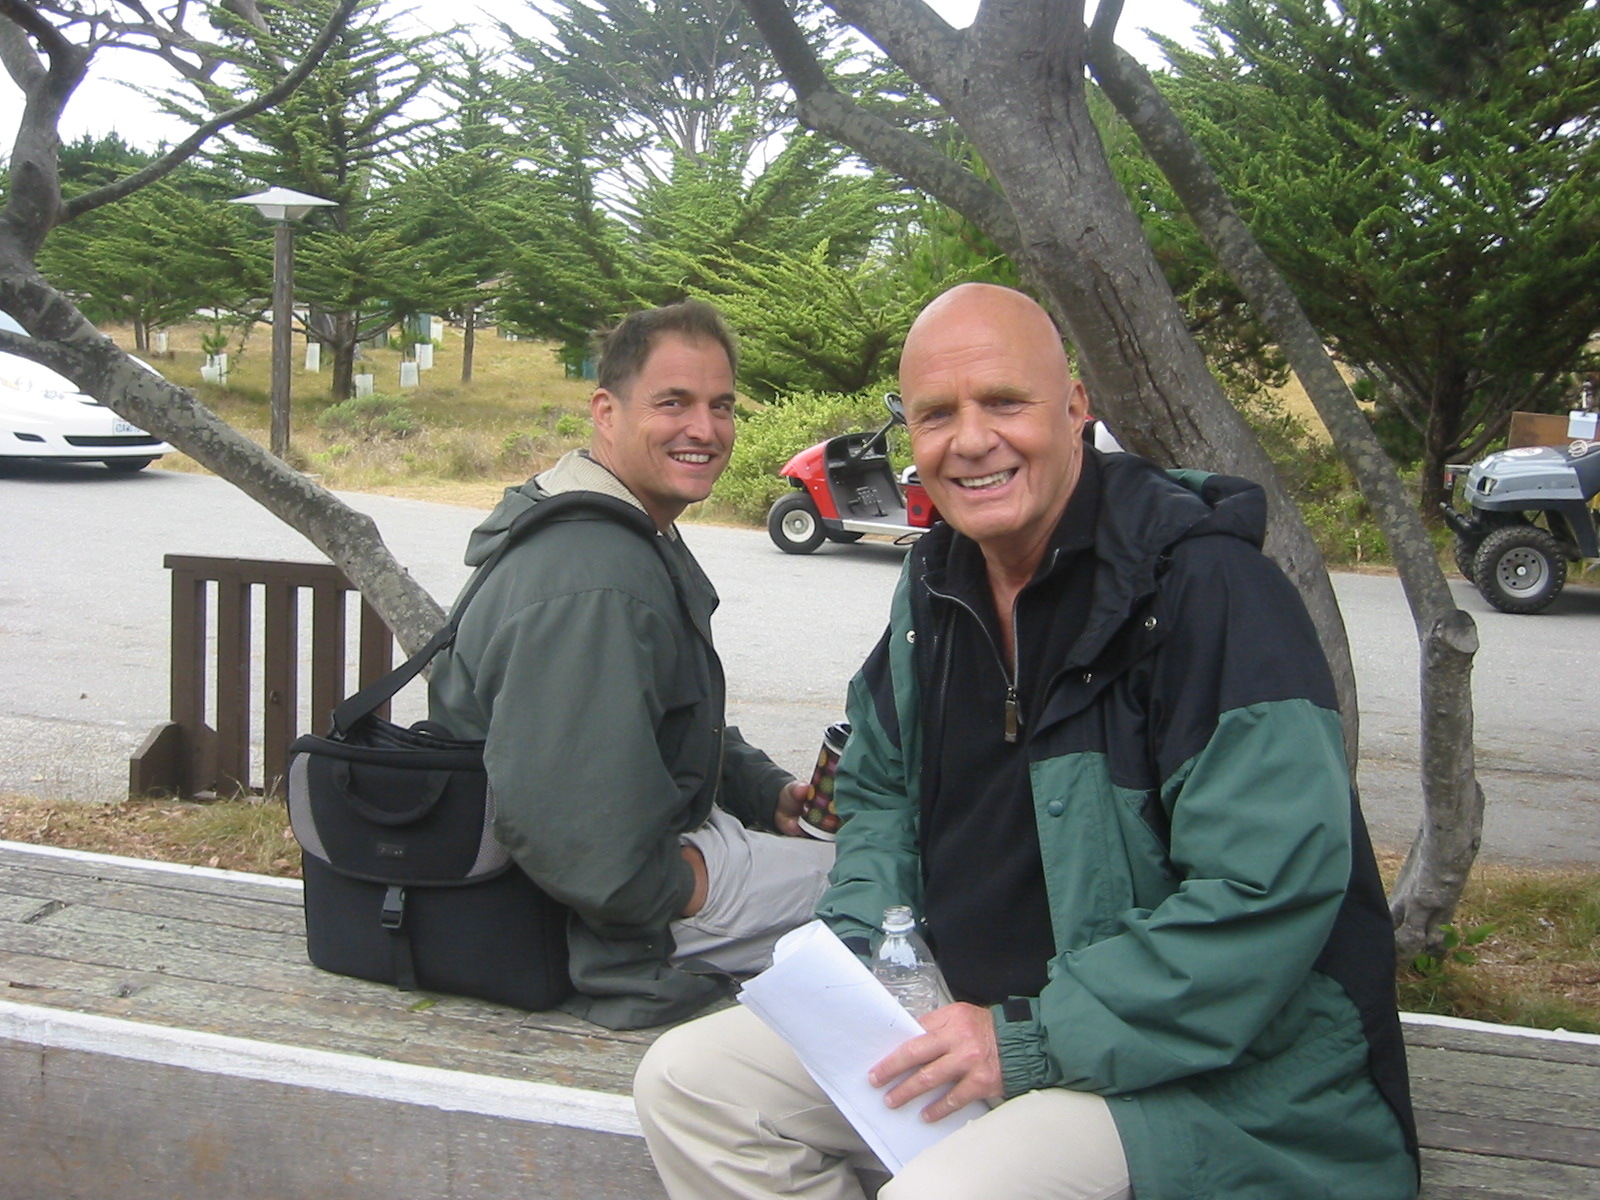 Michael DeLouise, Actor & Dr. Wayne Dyer, renowned Author and Speaker - set of The Shift